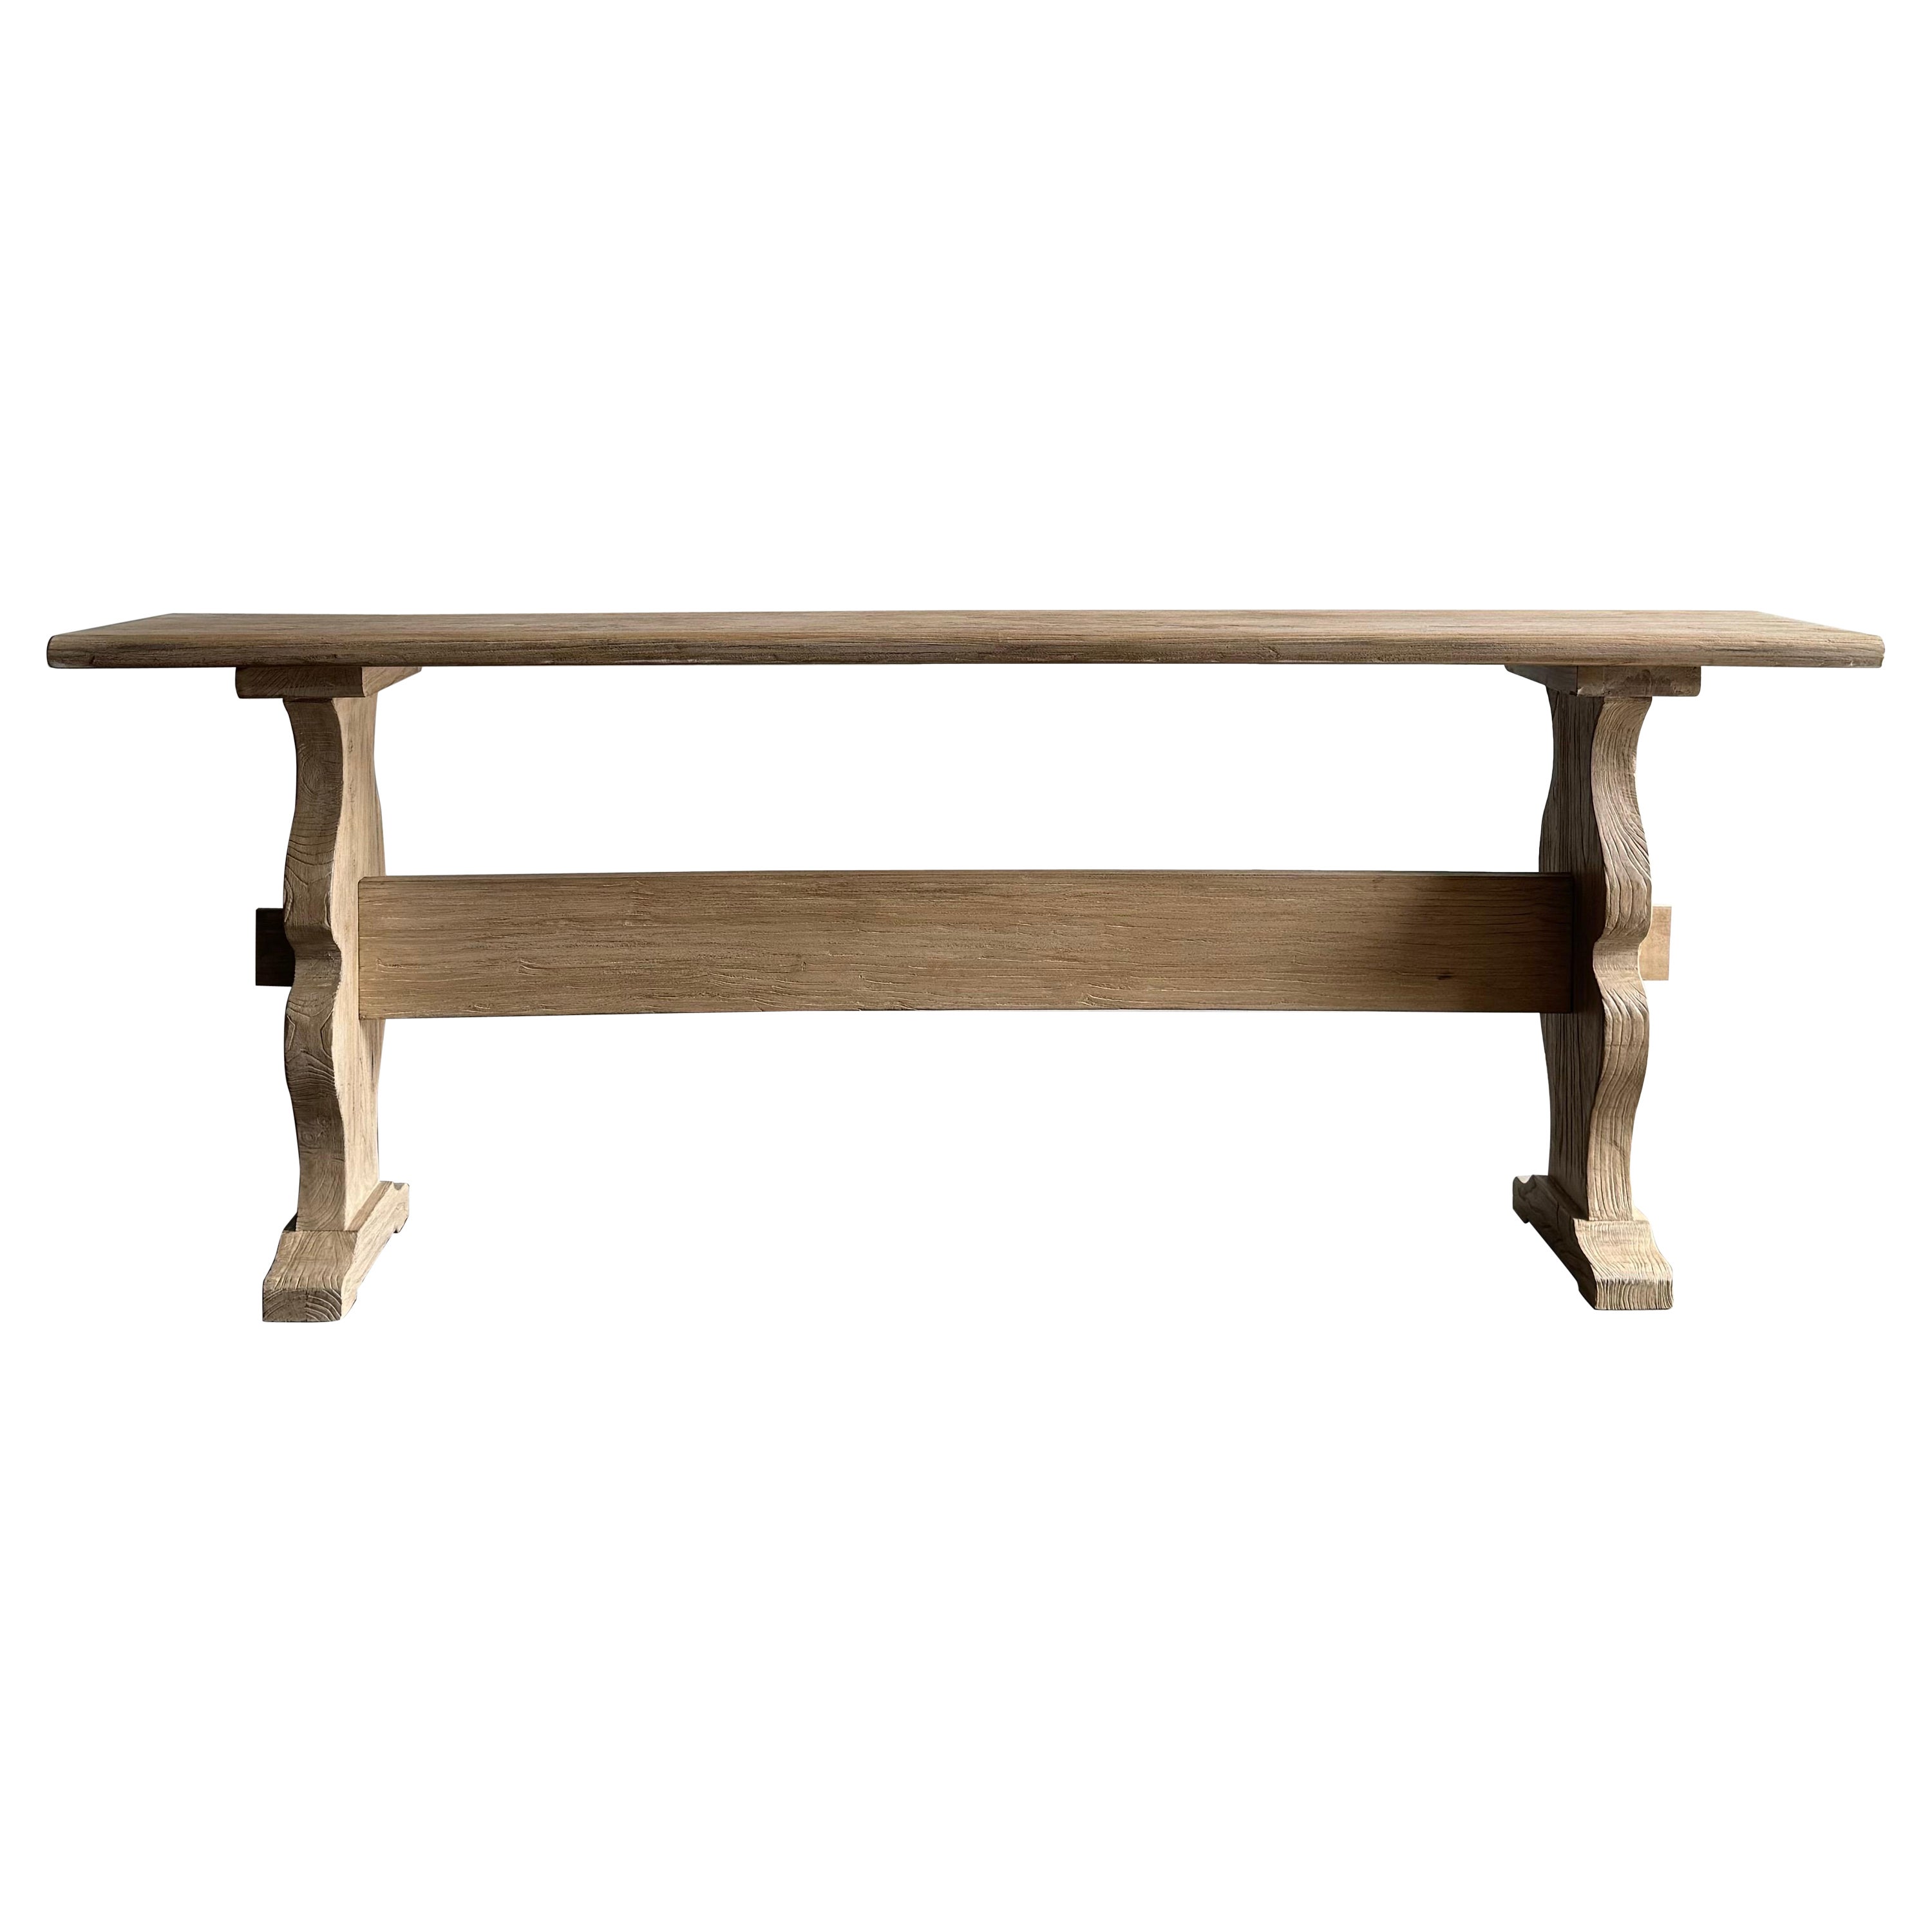 Amber reclaimed elm wood console table